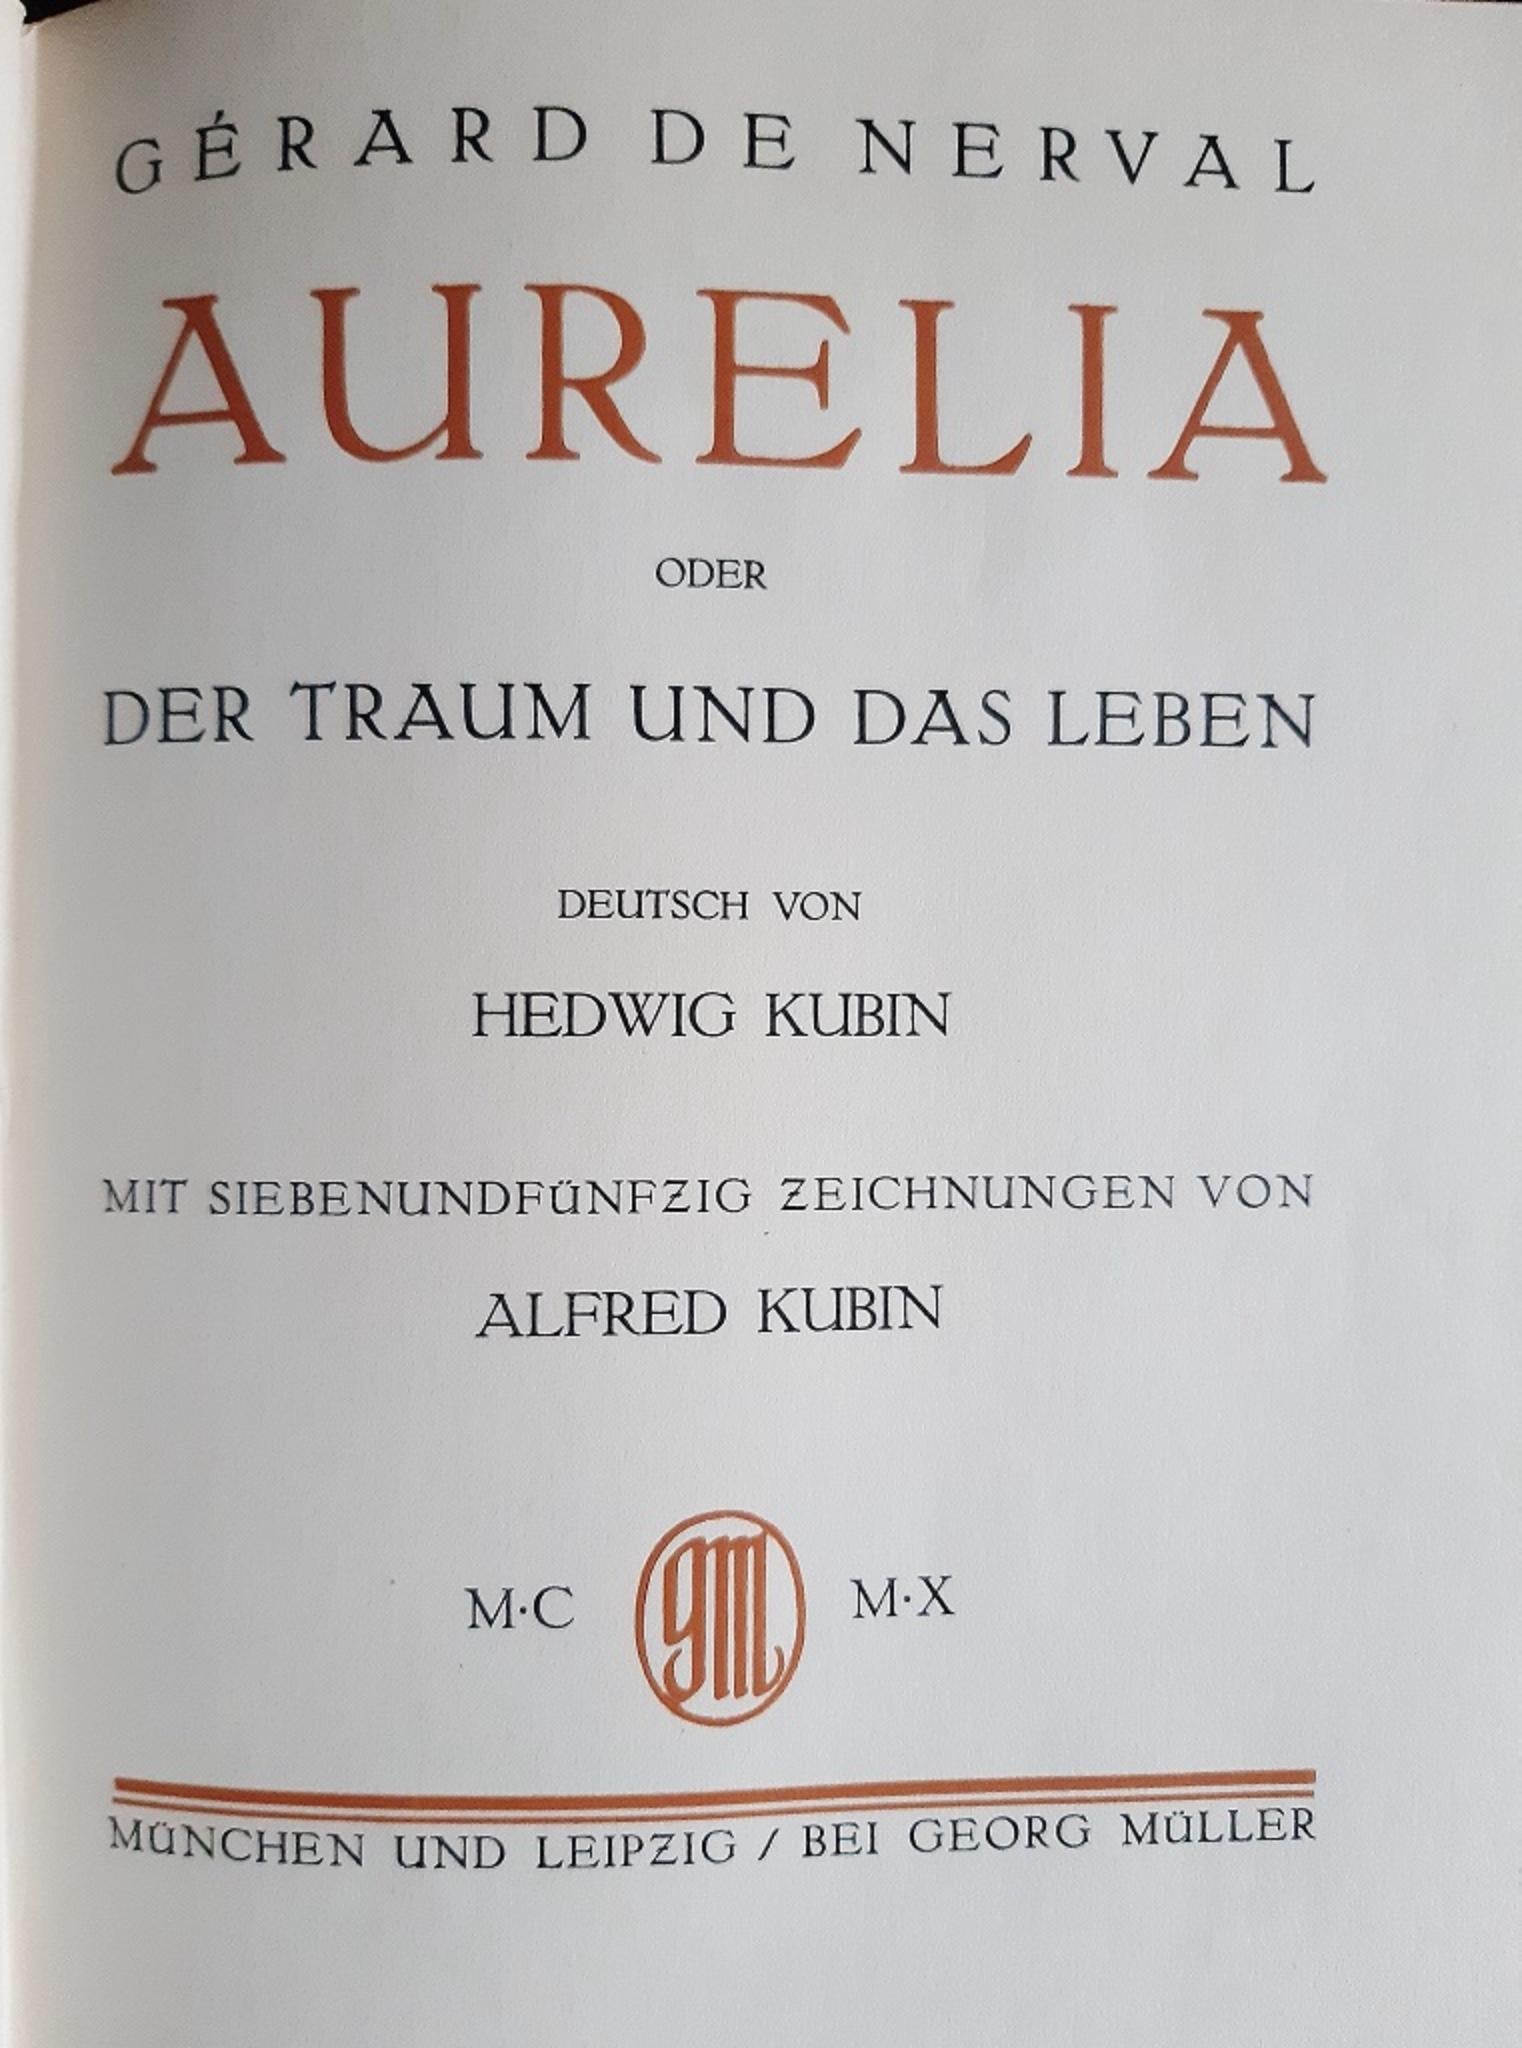 Aurelia - Rare Book Illustrated by Alfred Leopold Isidor Kubin - 1910 For Sale 2